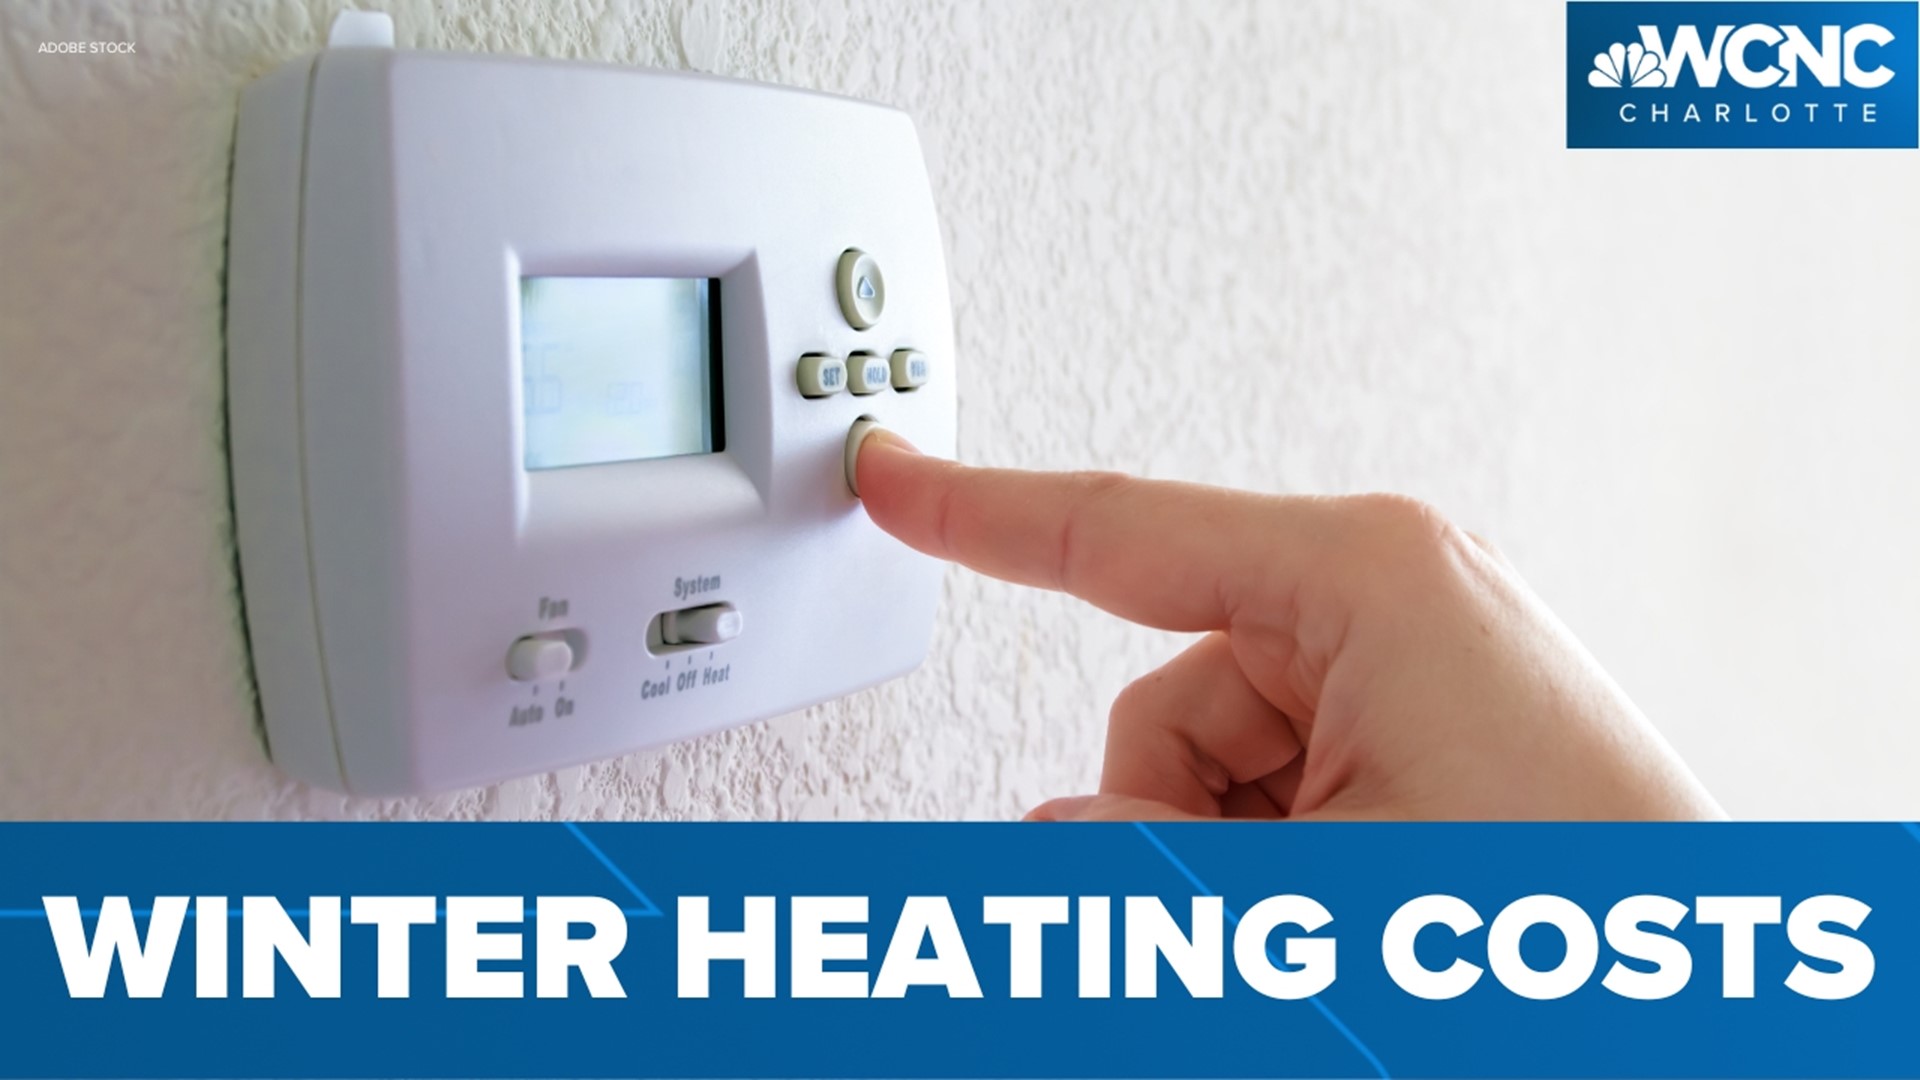 Get ready for some home heating sticker shock.